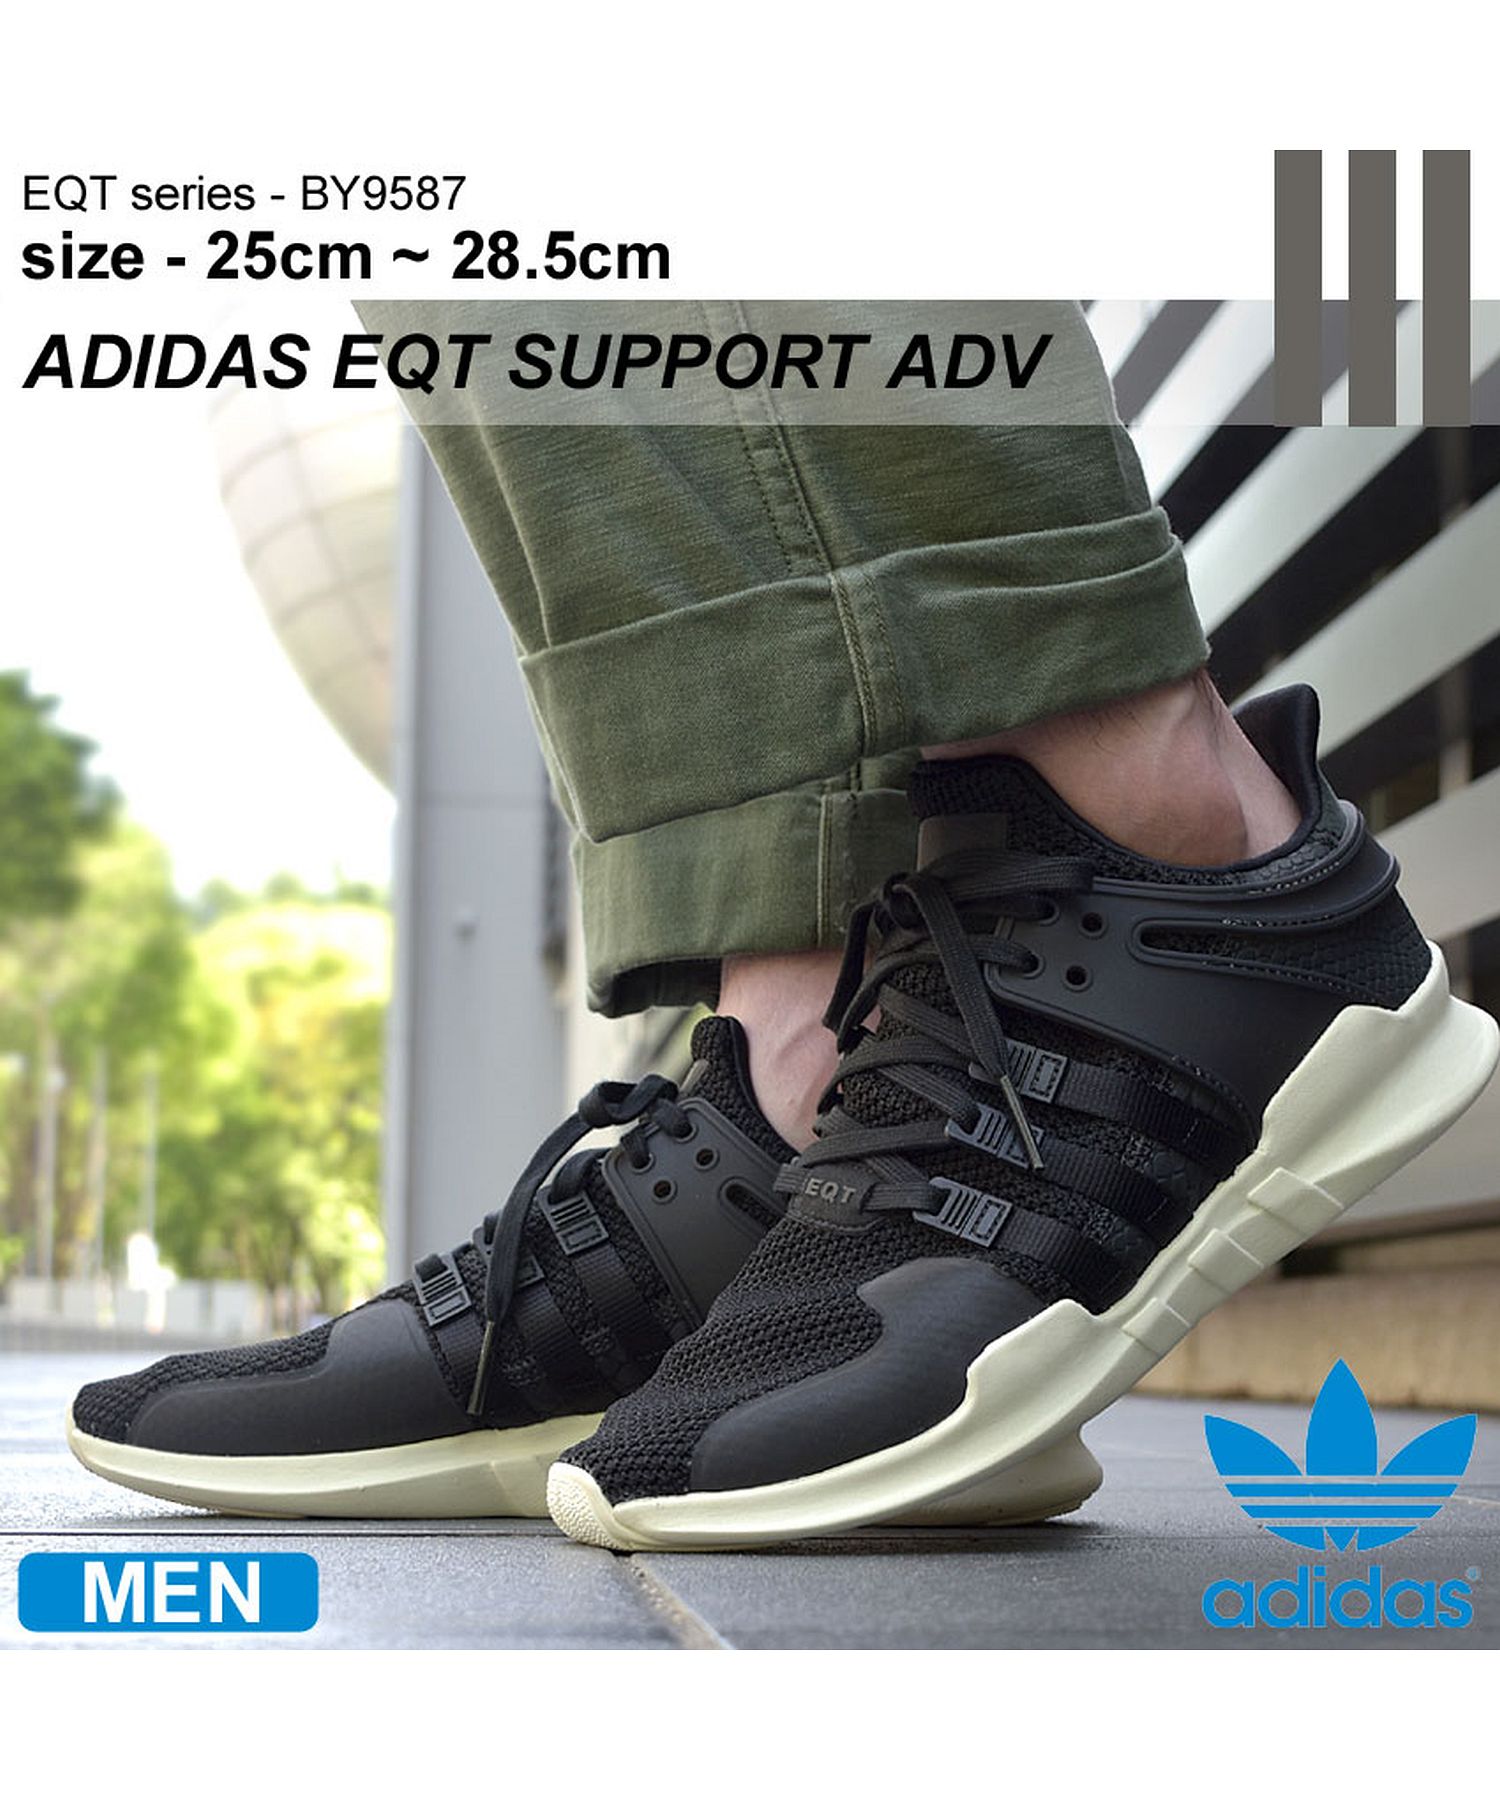 adidas by9587 cheap online